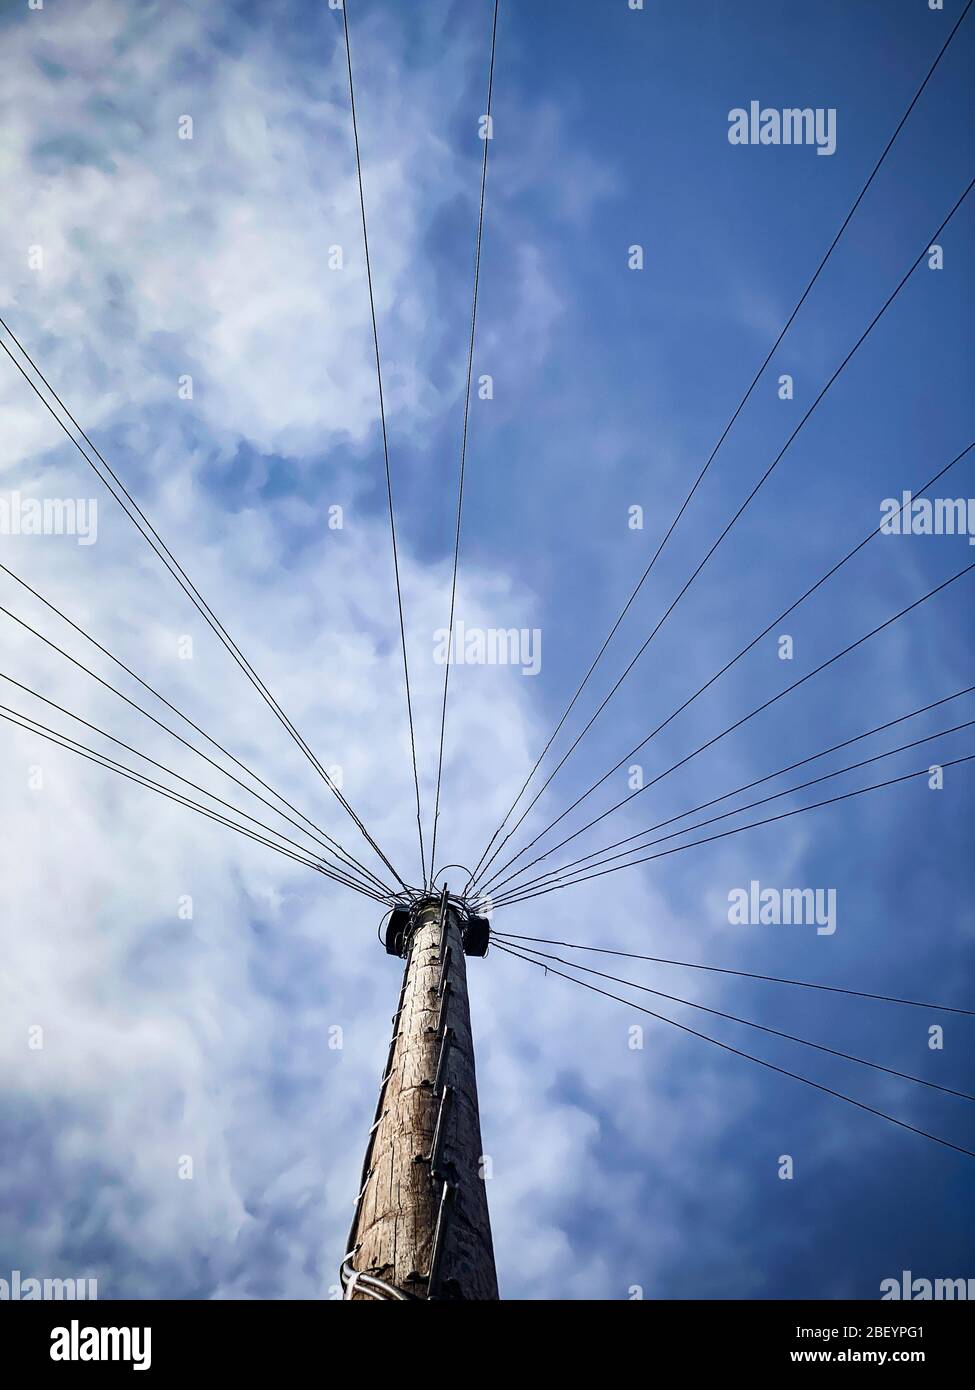 Telephone wires radiate from a wooden telegraph pole providing communication lines to homes in Worcestershire, UK. Stock Photo